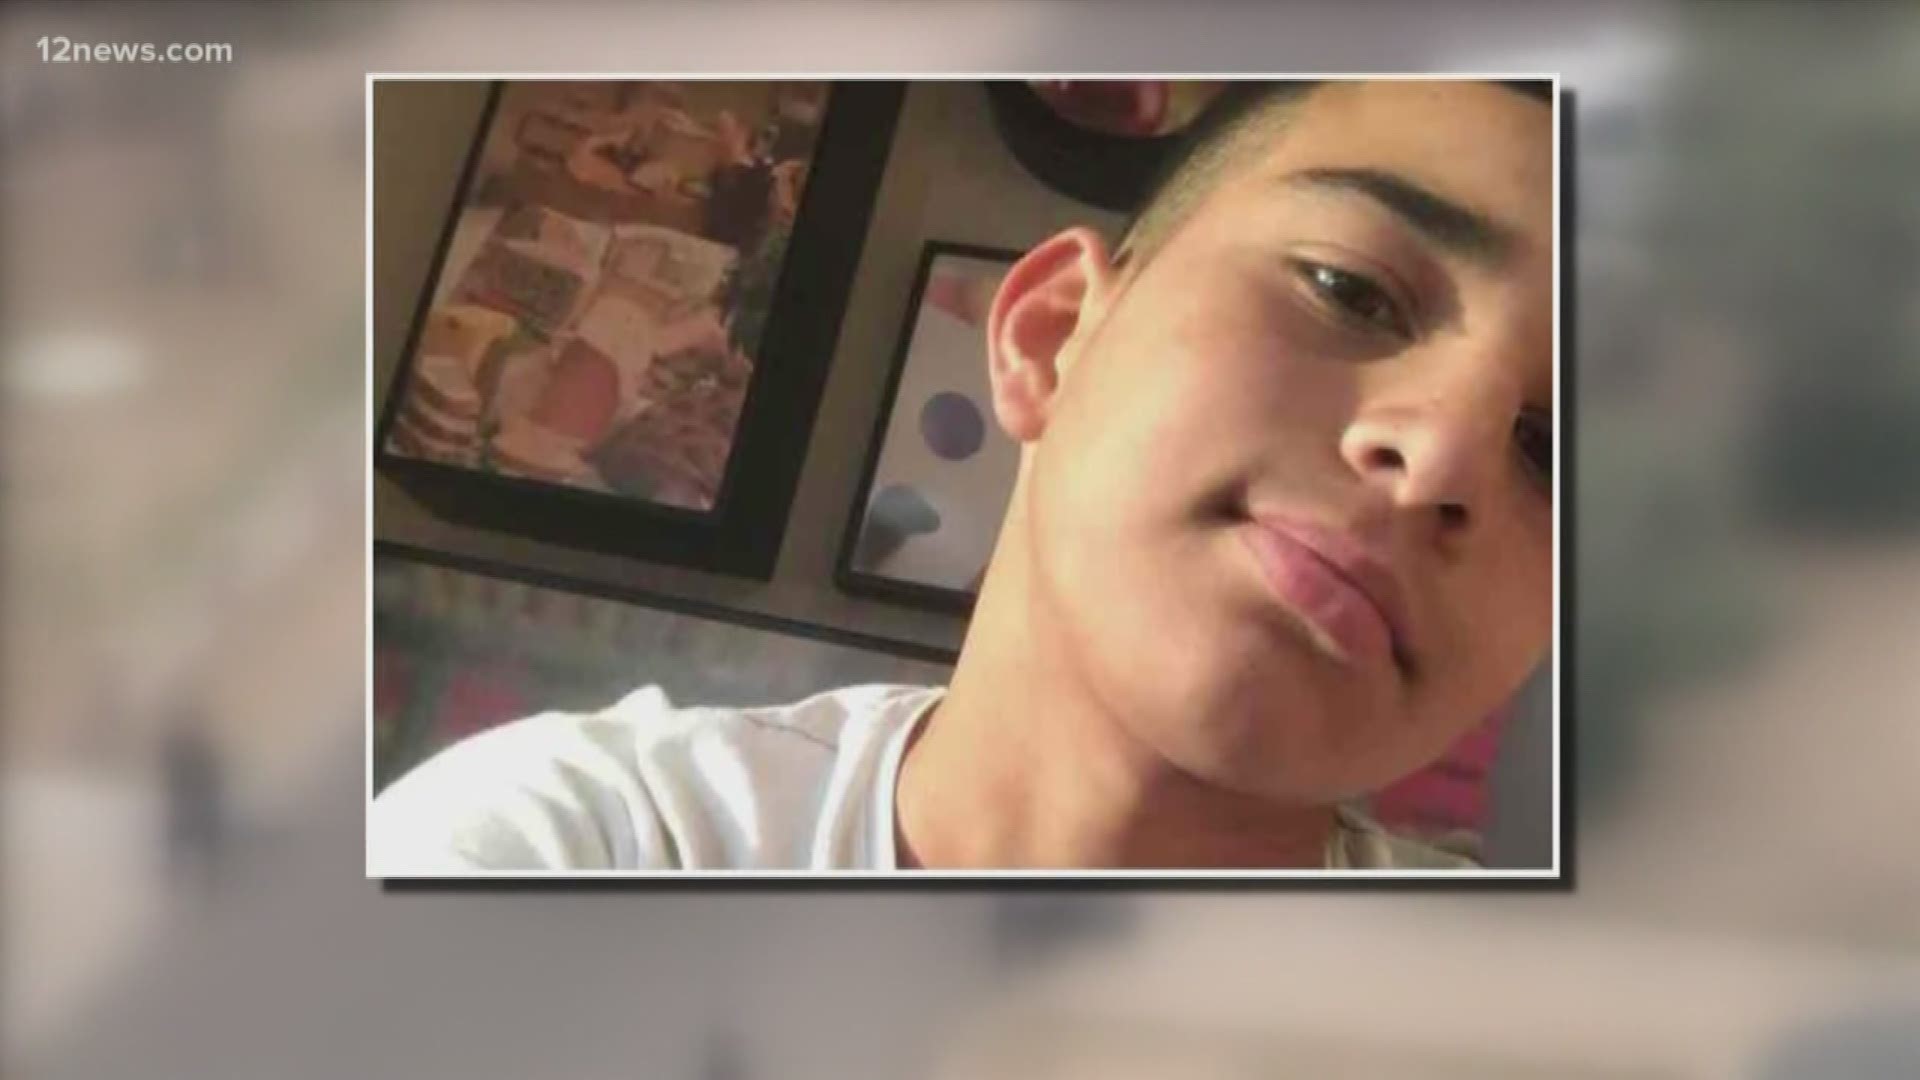 The City of Tempe confirmed Officer Joseph Jaen was granted early accidental disability retirement benefits. He shot and killed 14-year-old Antonio Arce January 2019